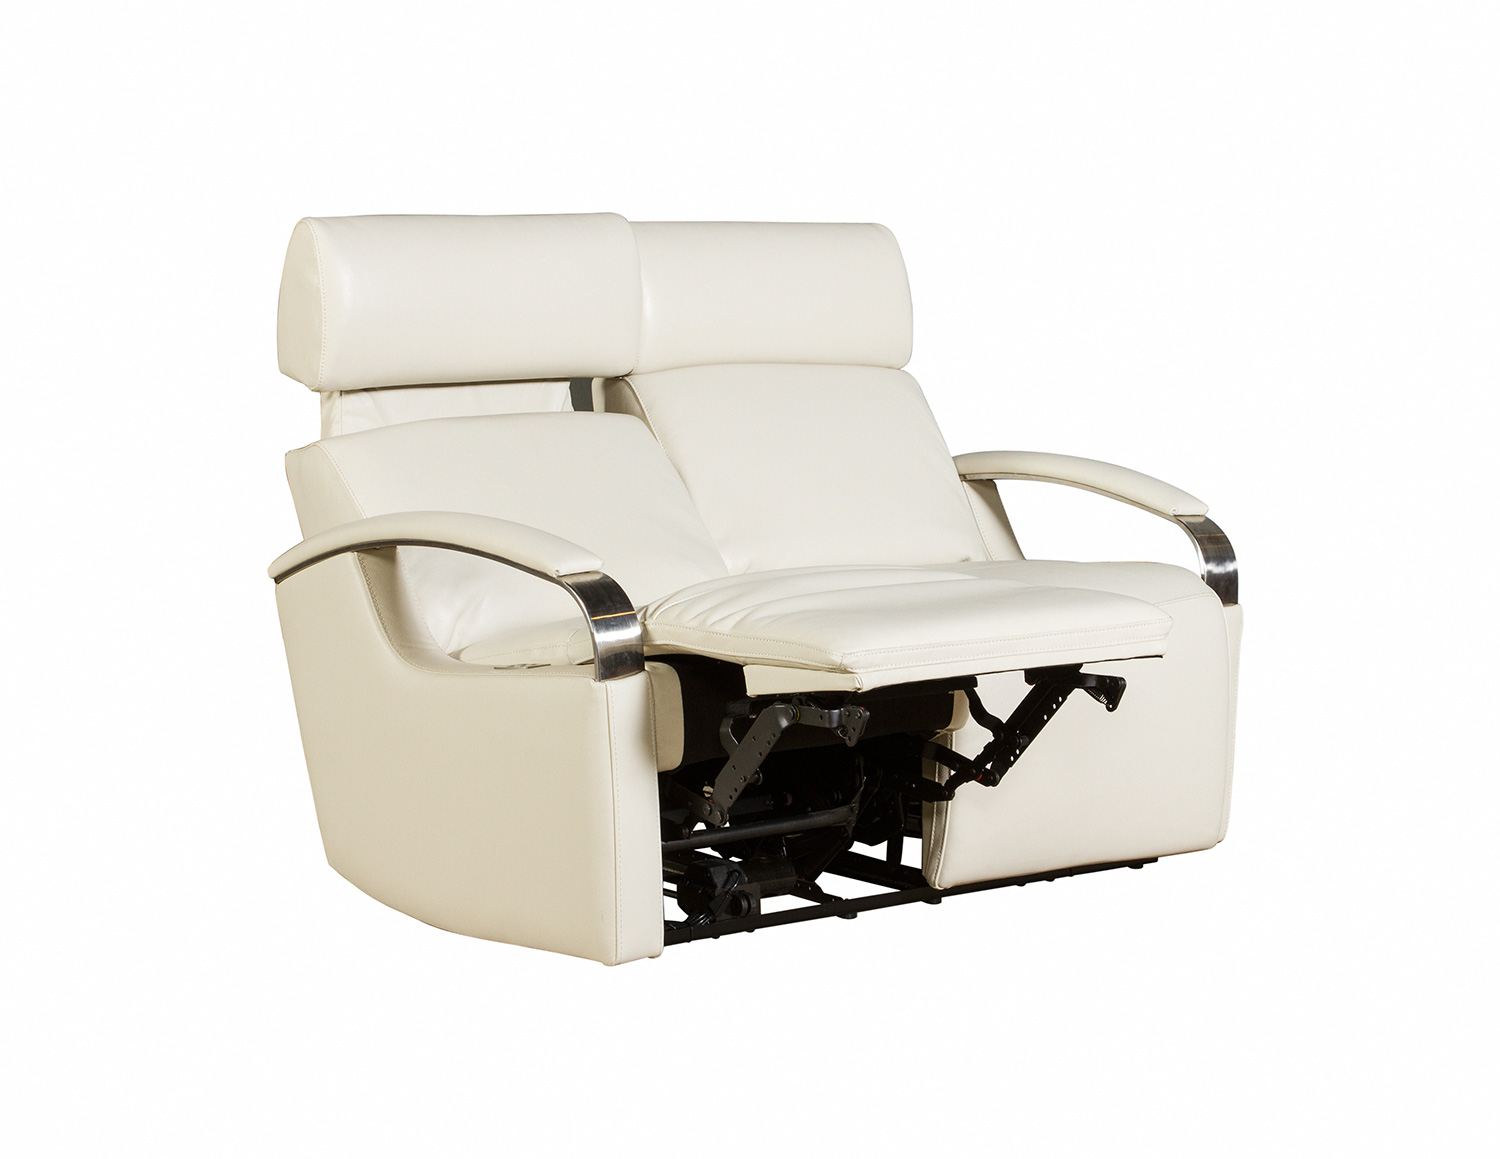 Barcalounger Cosmo Power Reclining Loveseat with Power Head Rests - Cashmere White/Leather Match